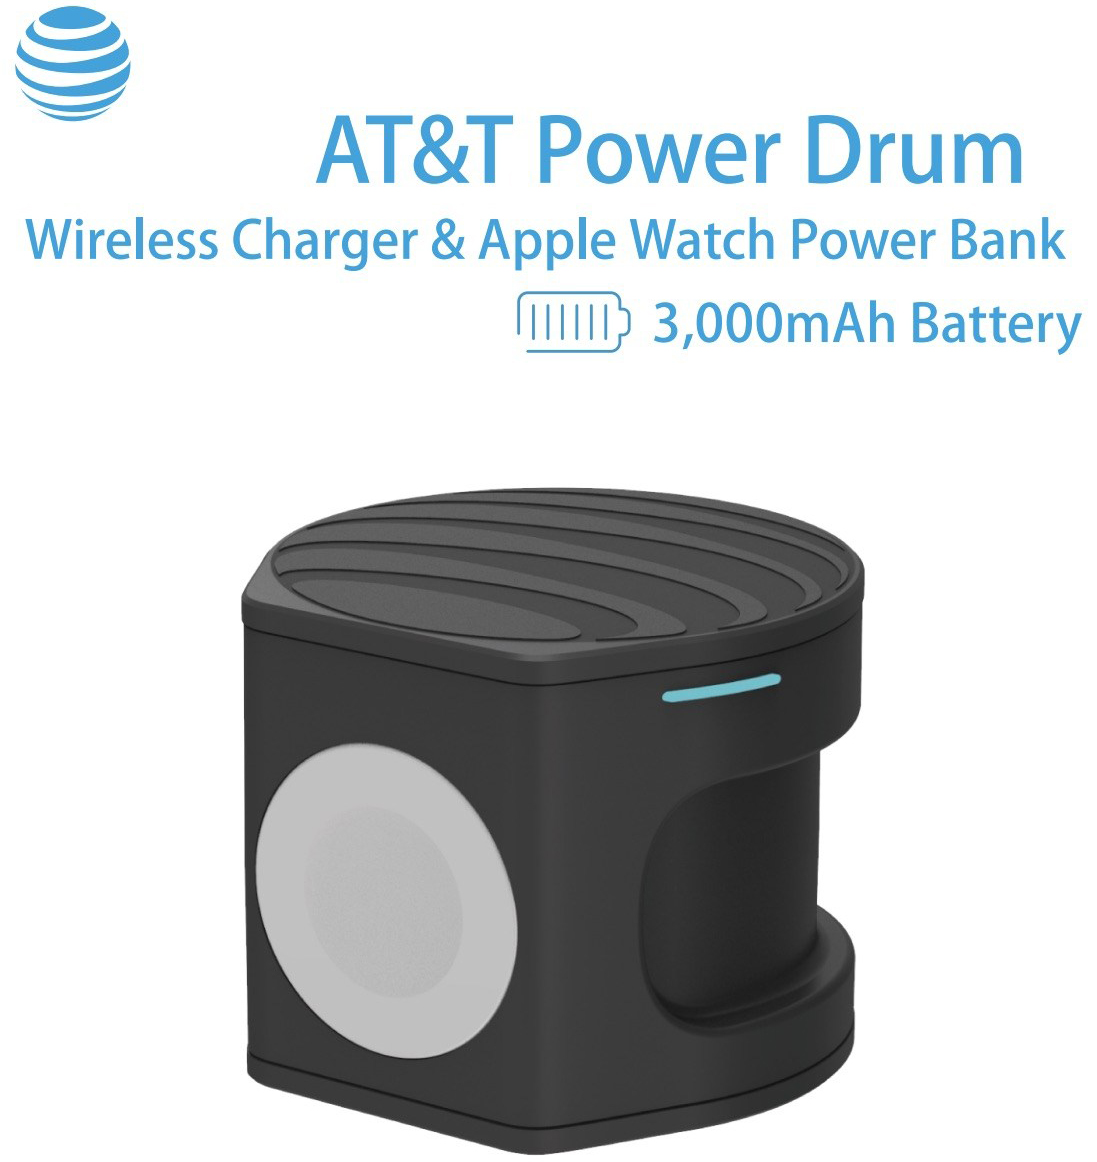 AT&T's Power Drum is a multi-purpose wireless charging solution for iPhone and Apple Watch